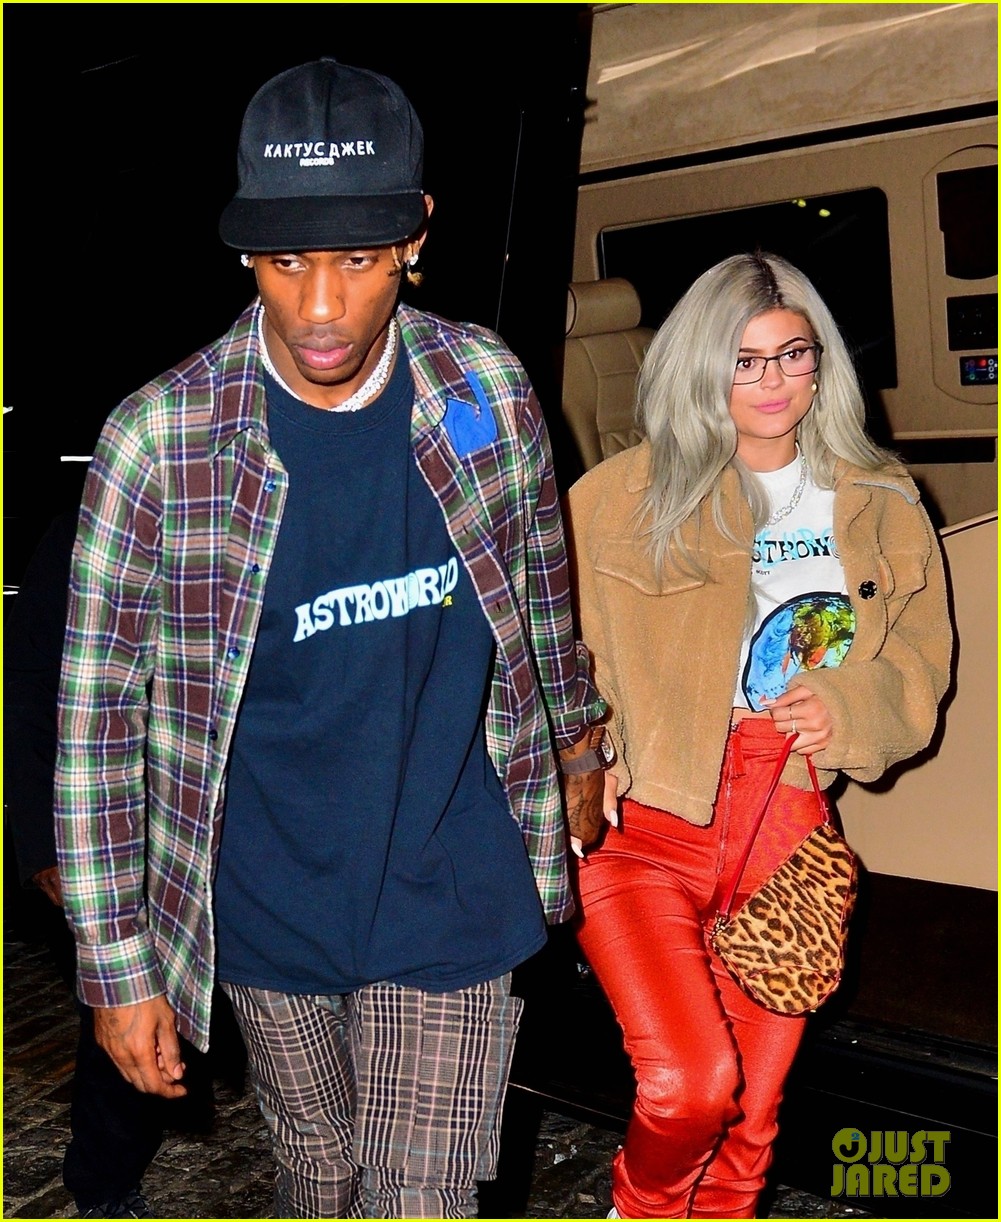 kylie jenner travis scott hold hands after his nyc concert 16